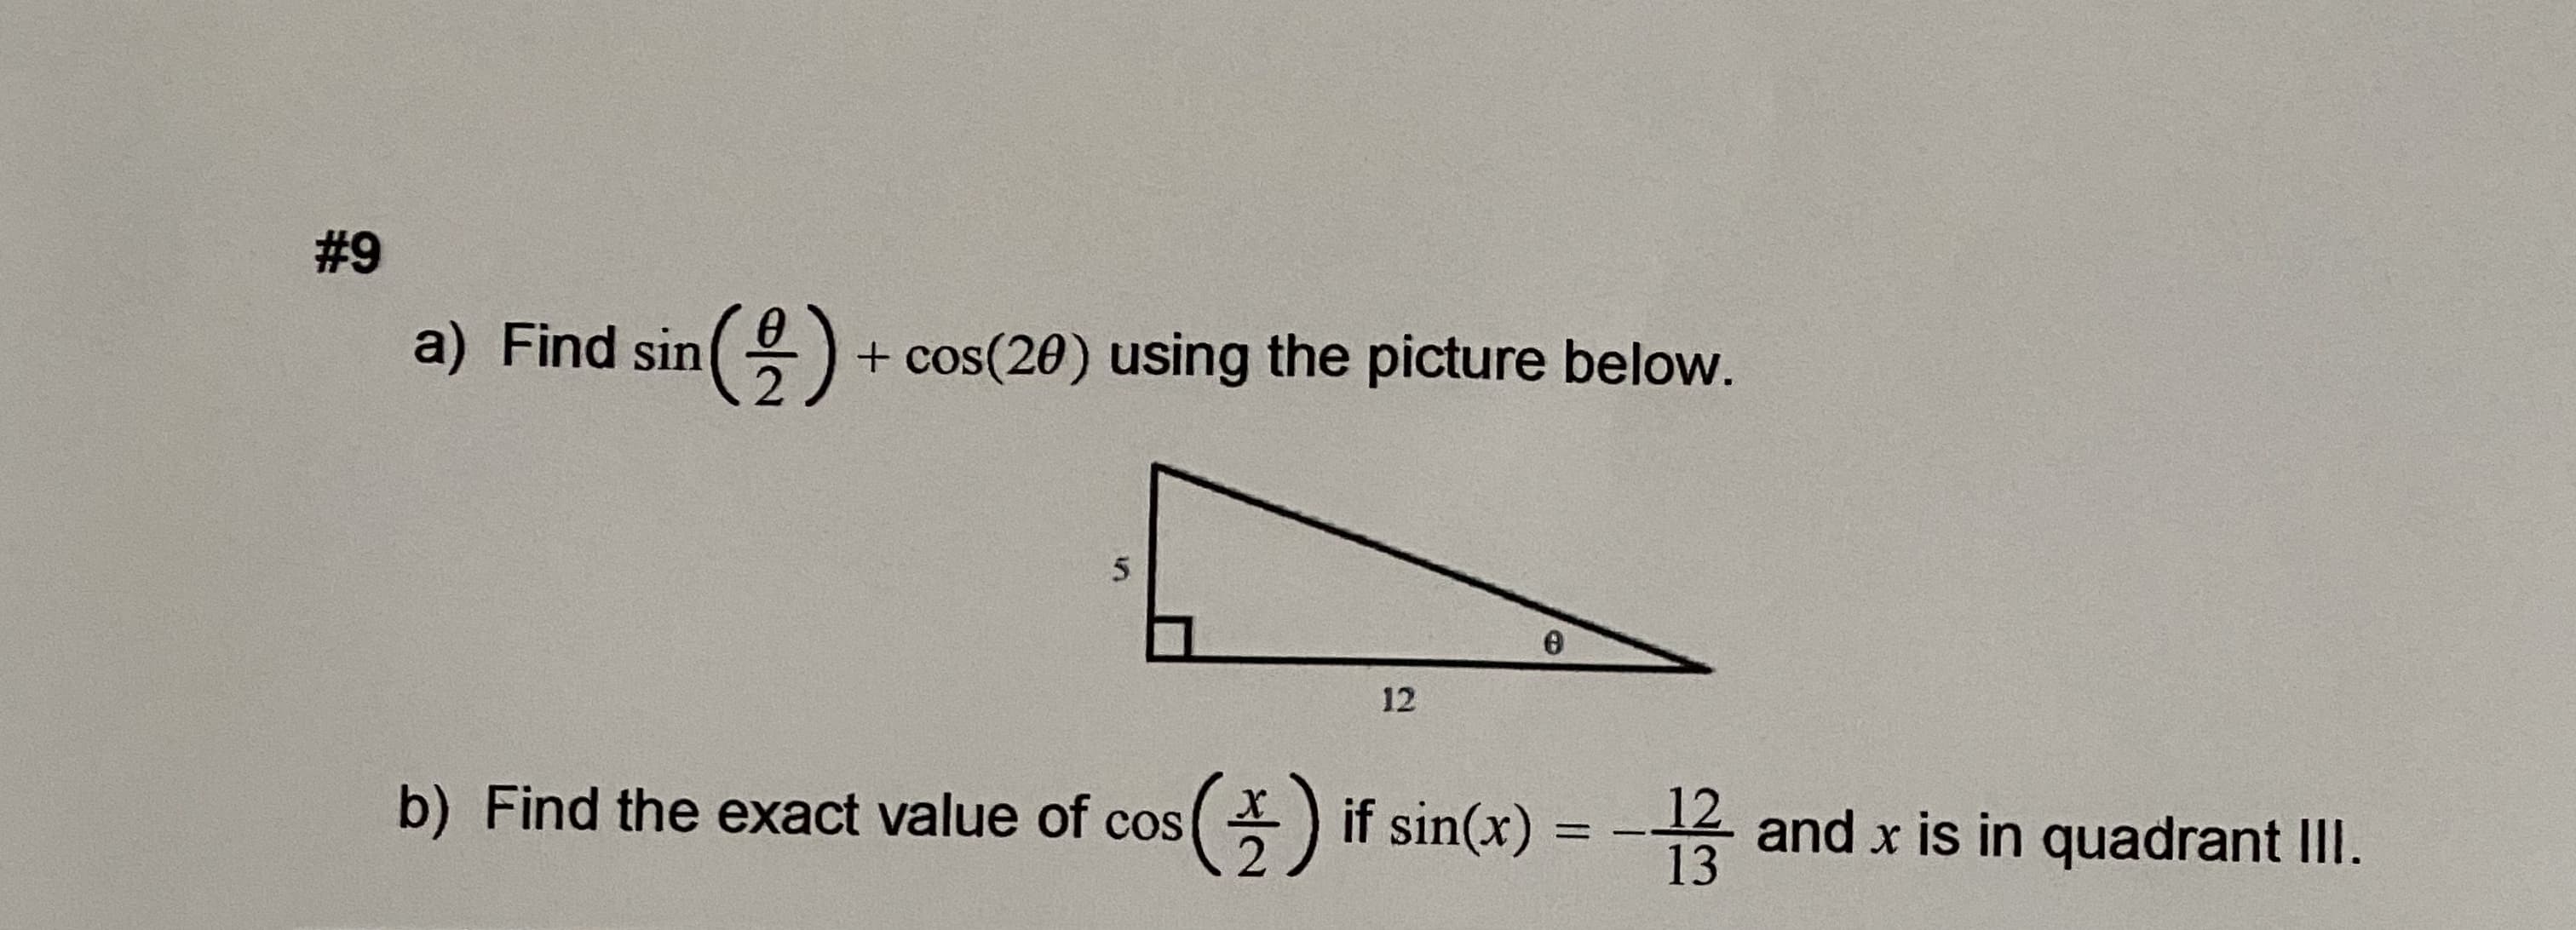 #9
a) Find sin() + cos(20) using the picture below.
12
b) Find the exact value of cos() if sin(x) = - and x is in quadrant III.
12
13
%3D
